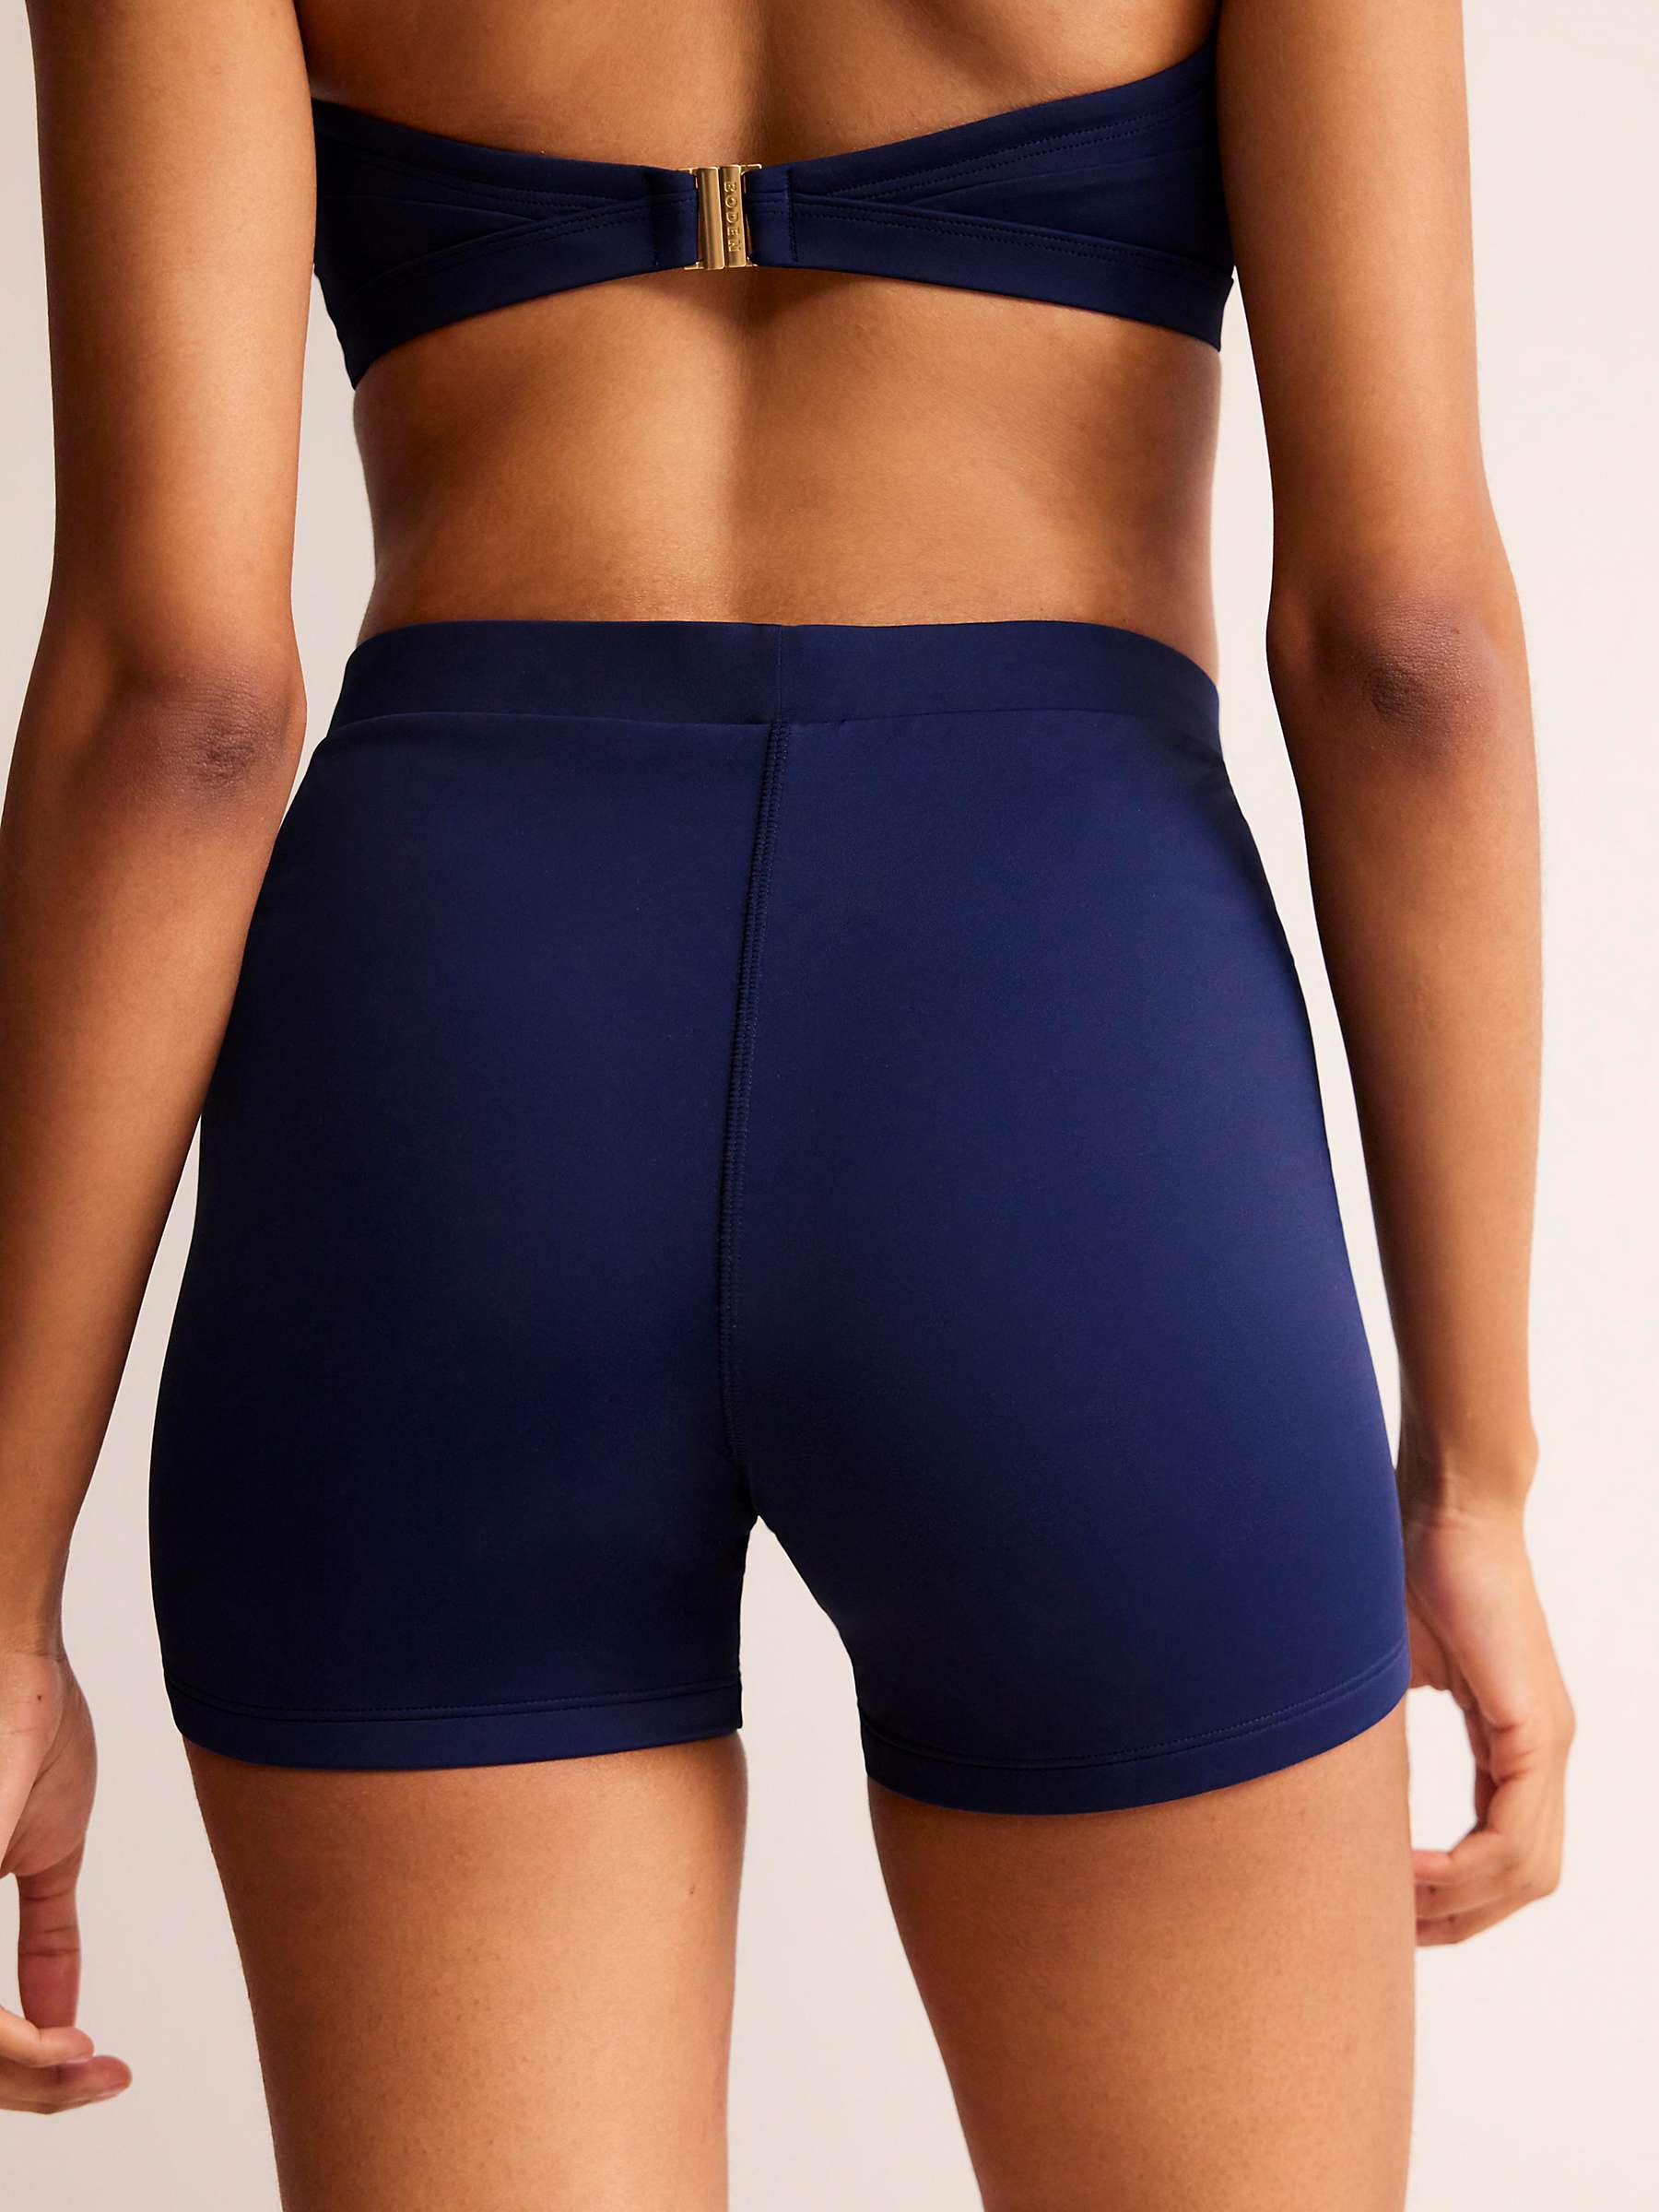 Buy Boden Swim Cycling Shorts, Navy Online at johnlewis.com